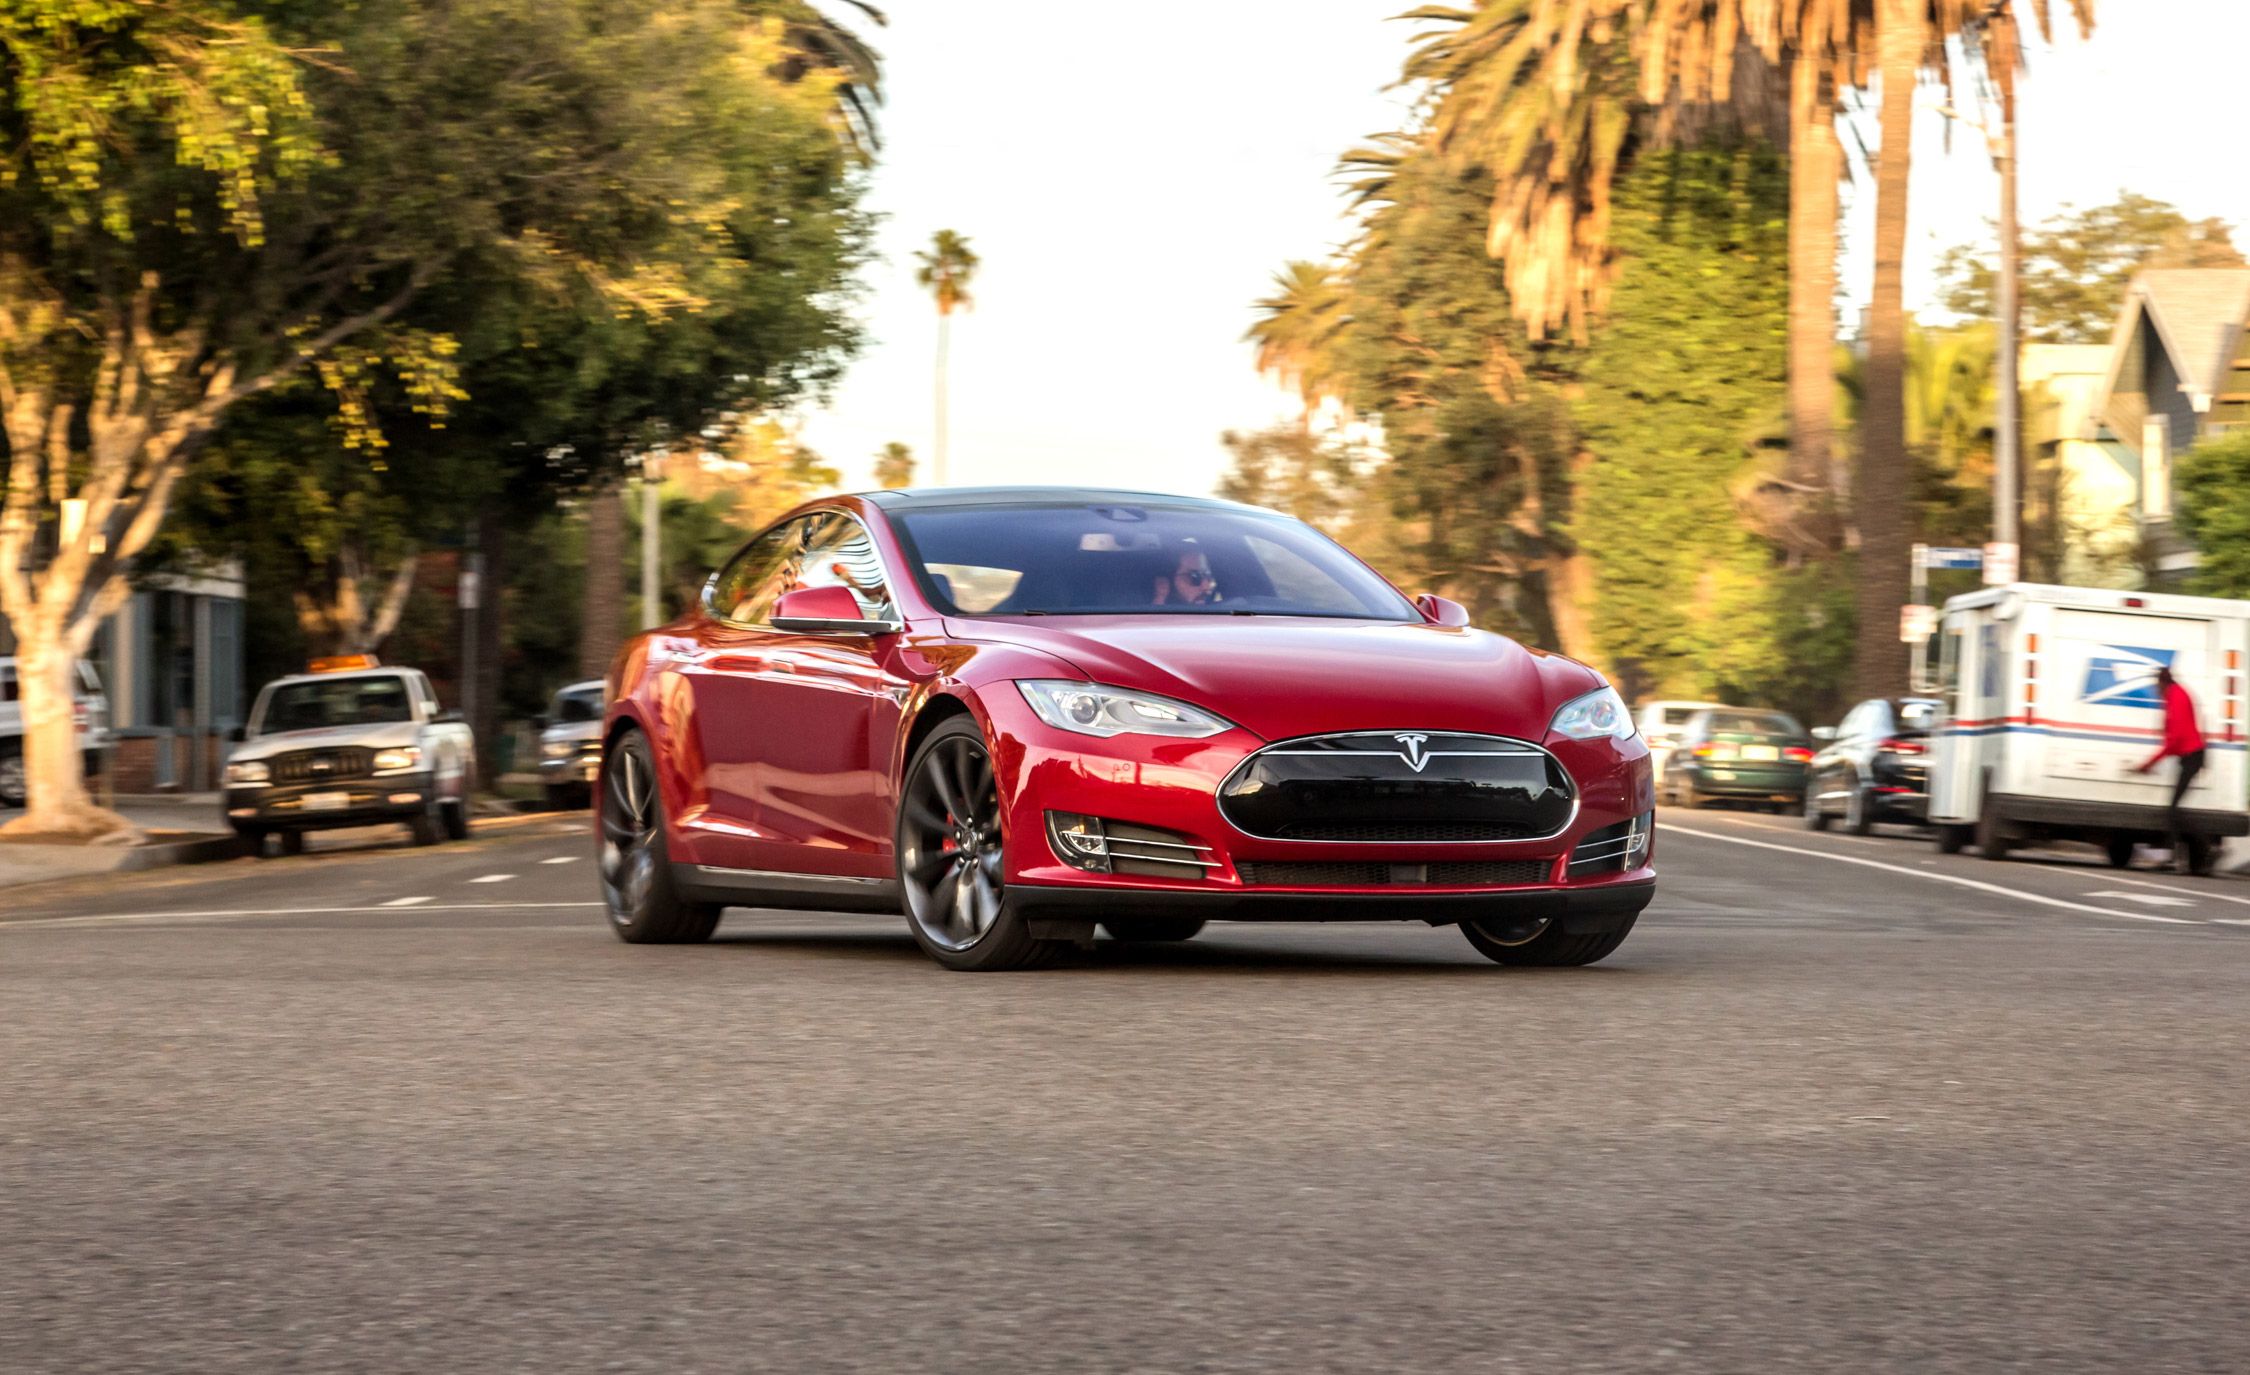 2015 Used Tesla Model S for Commuting: Key Factors & Considerations to Make the Right Choice